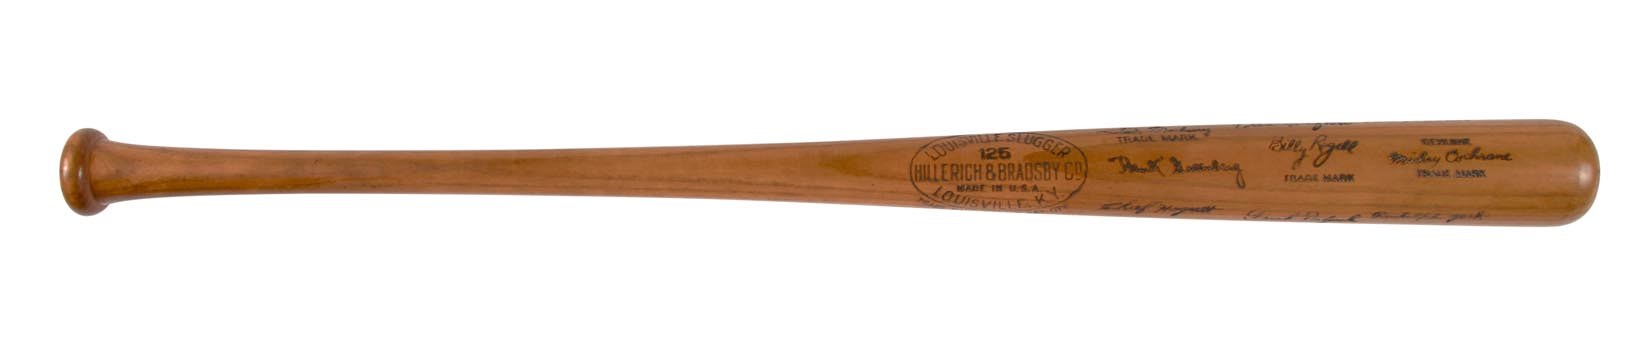 Ty Cobb and Detroit Tigers - 1934 Detroit Tigers American League Champions "Black" Bat - The Rarest of Them All!